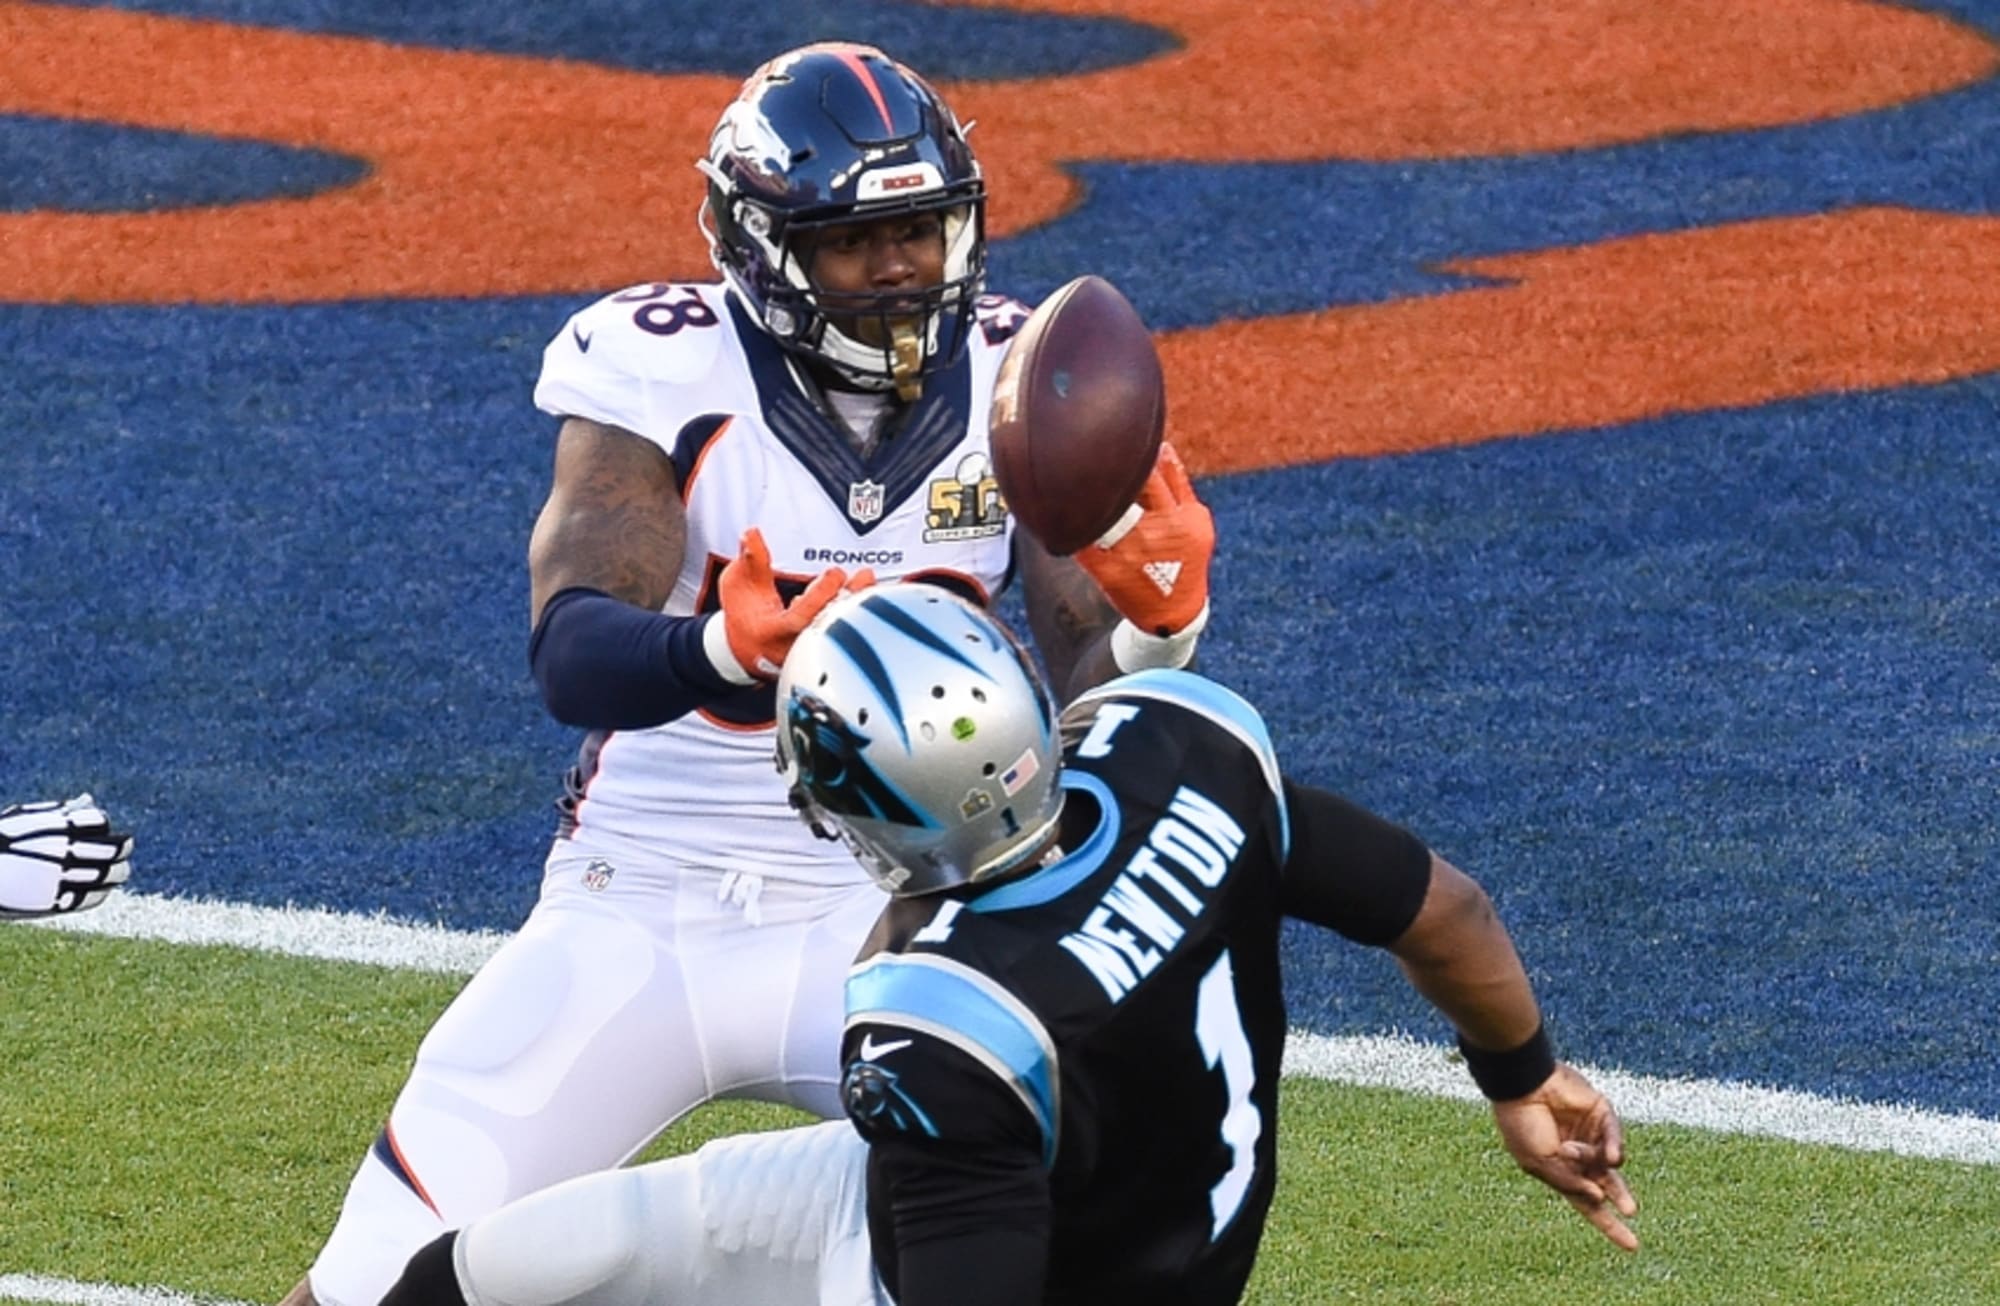 Panthers vs Broncos: Preview, Predictions, and More